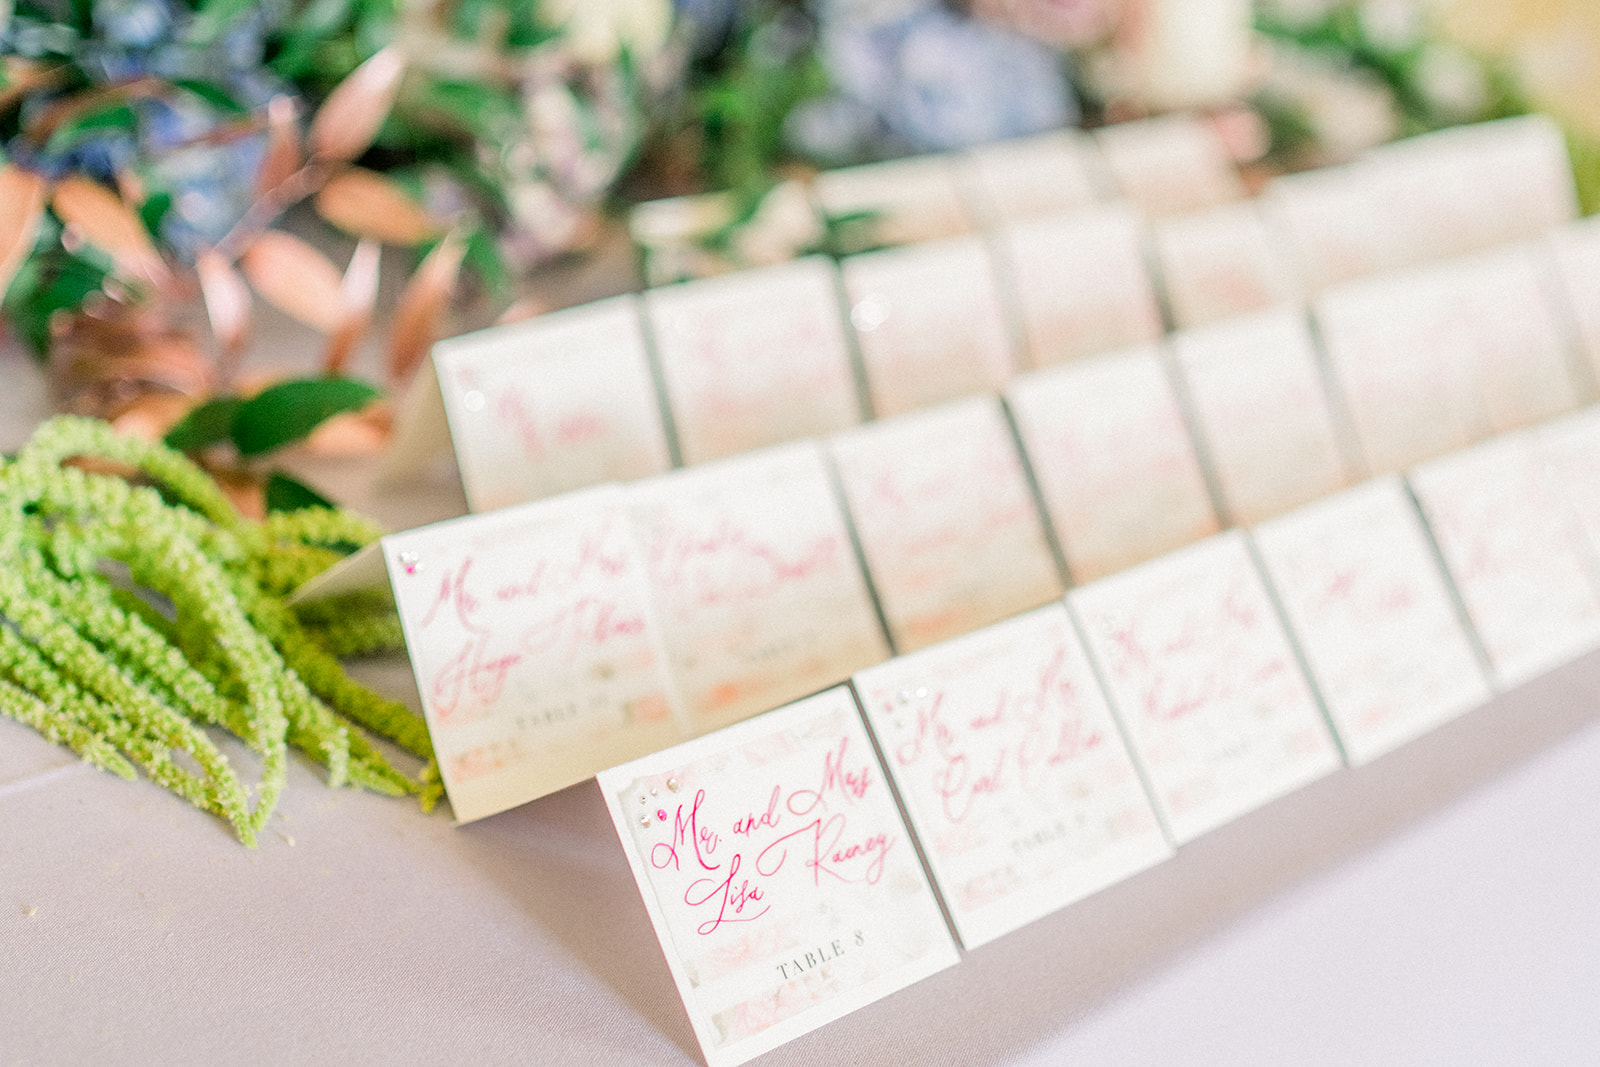 Custom destination wedding favor tags with calligraphy adding a personal touch to a luxury wedding